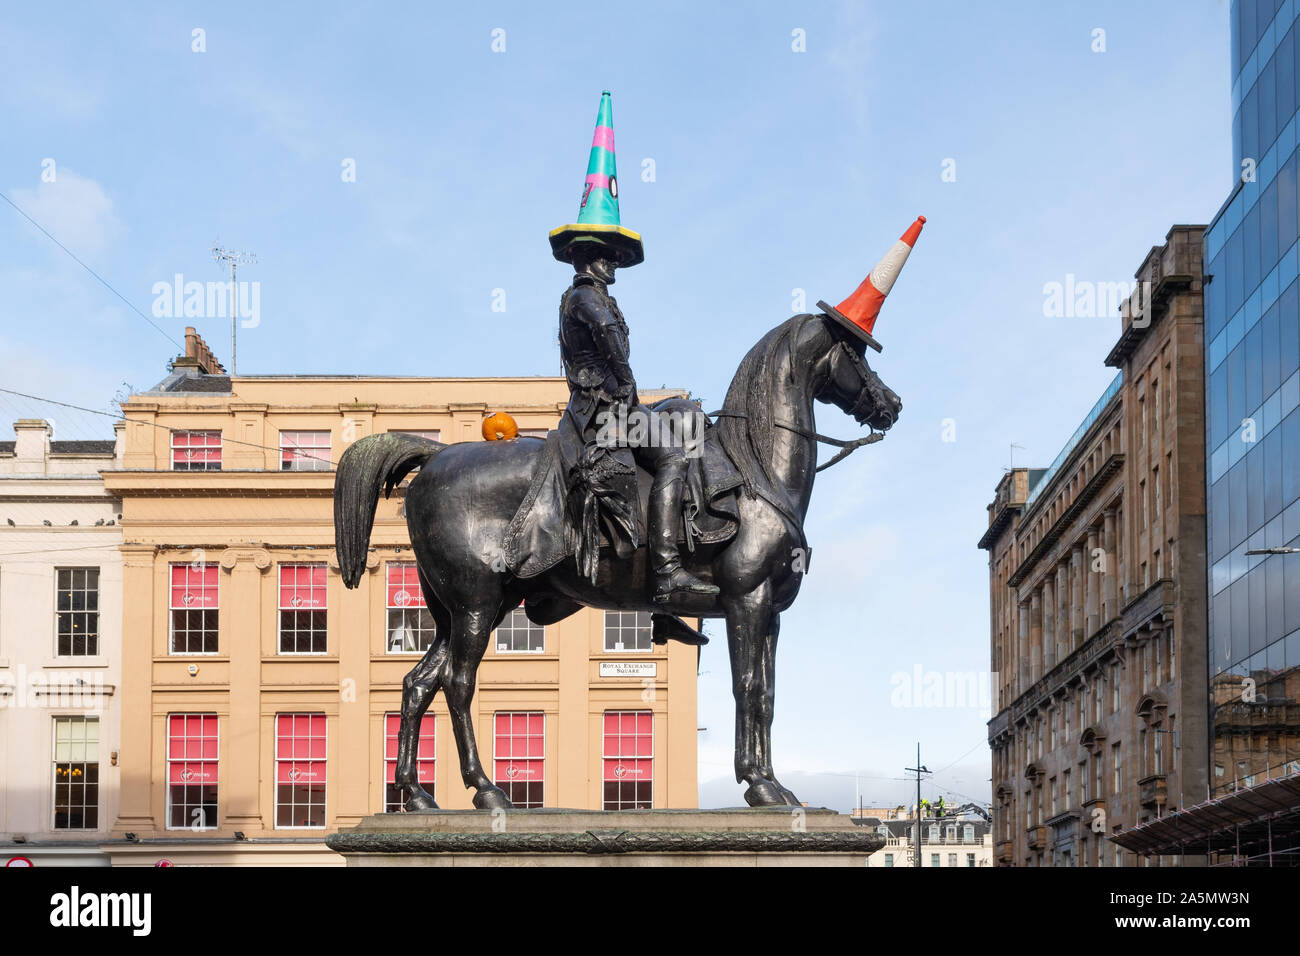 Duke of Wellington Statue with traditional traffic cone and halloween theme decorations, Glasgow, Scotland, UK Stock Photo